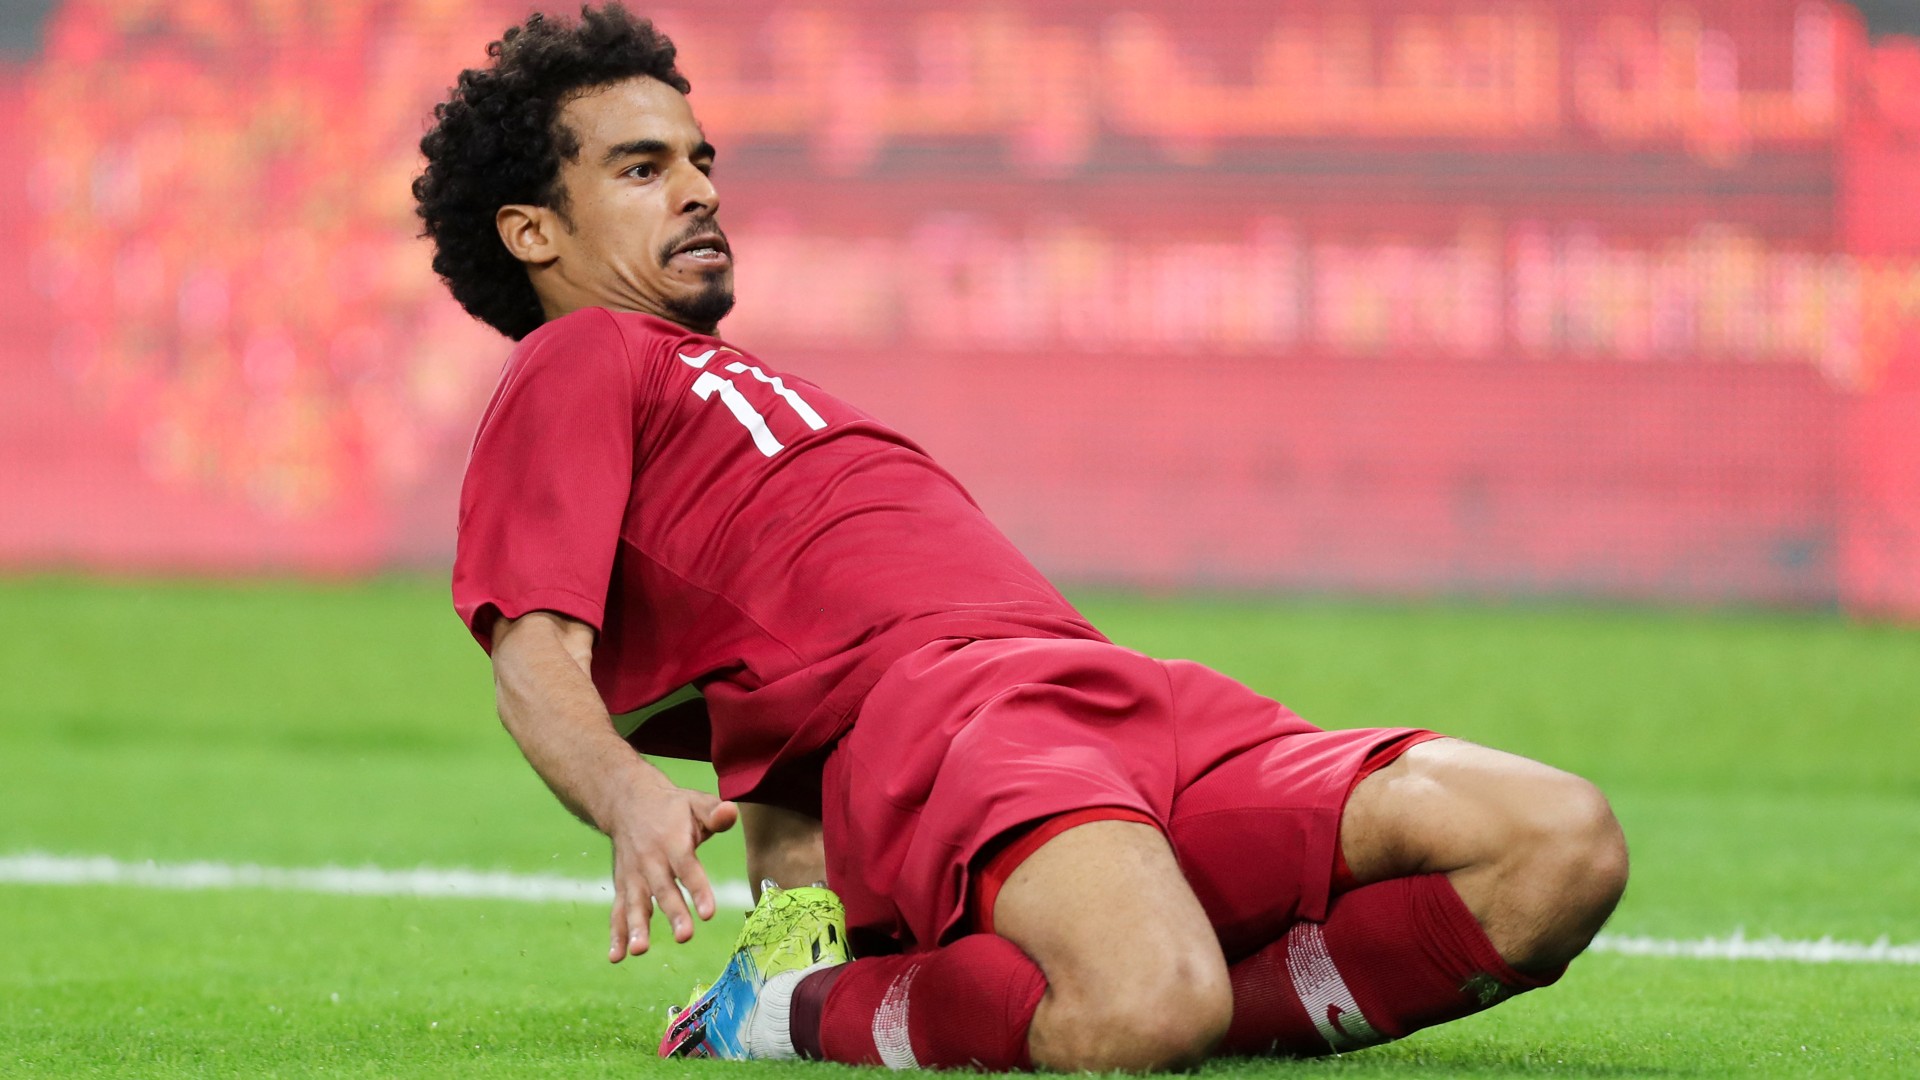 Qatar's Akram Afif celebrates his goal during the 24th Arabian Gulf Cup Group A football match against the United Arab Emirates at the Khalifa International Stadium in Doha on 2 December, 2019 (AFP)